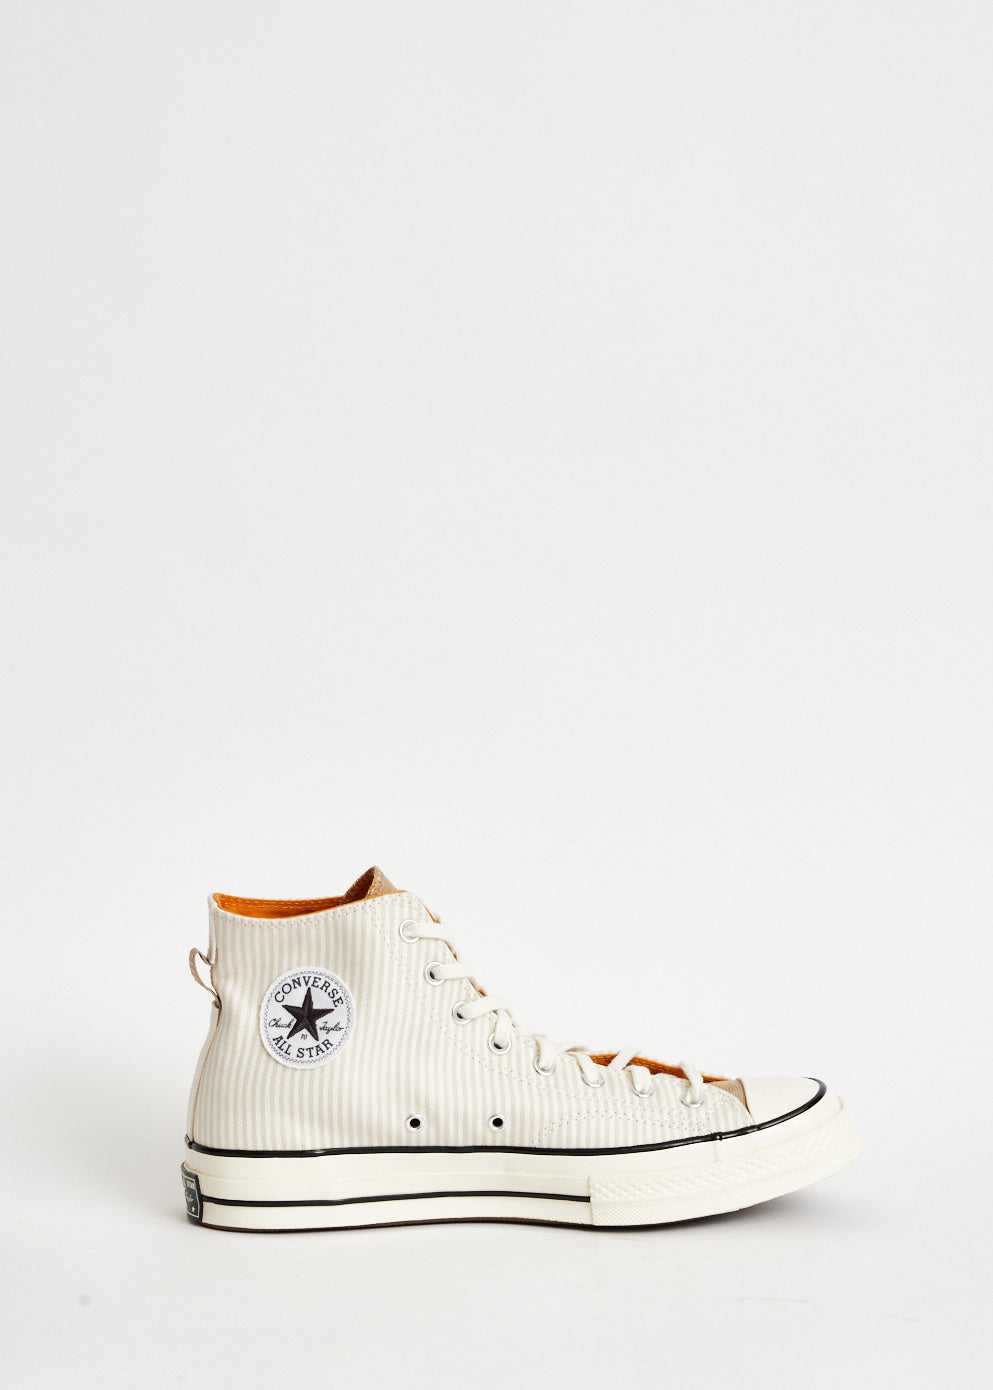 Chuck Taylor 70 High Sneakers